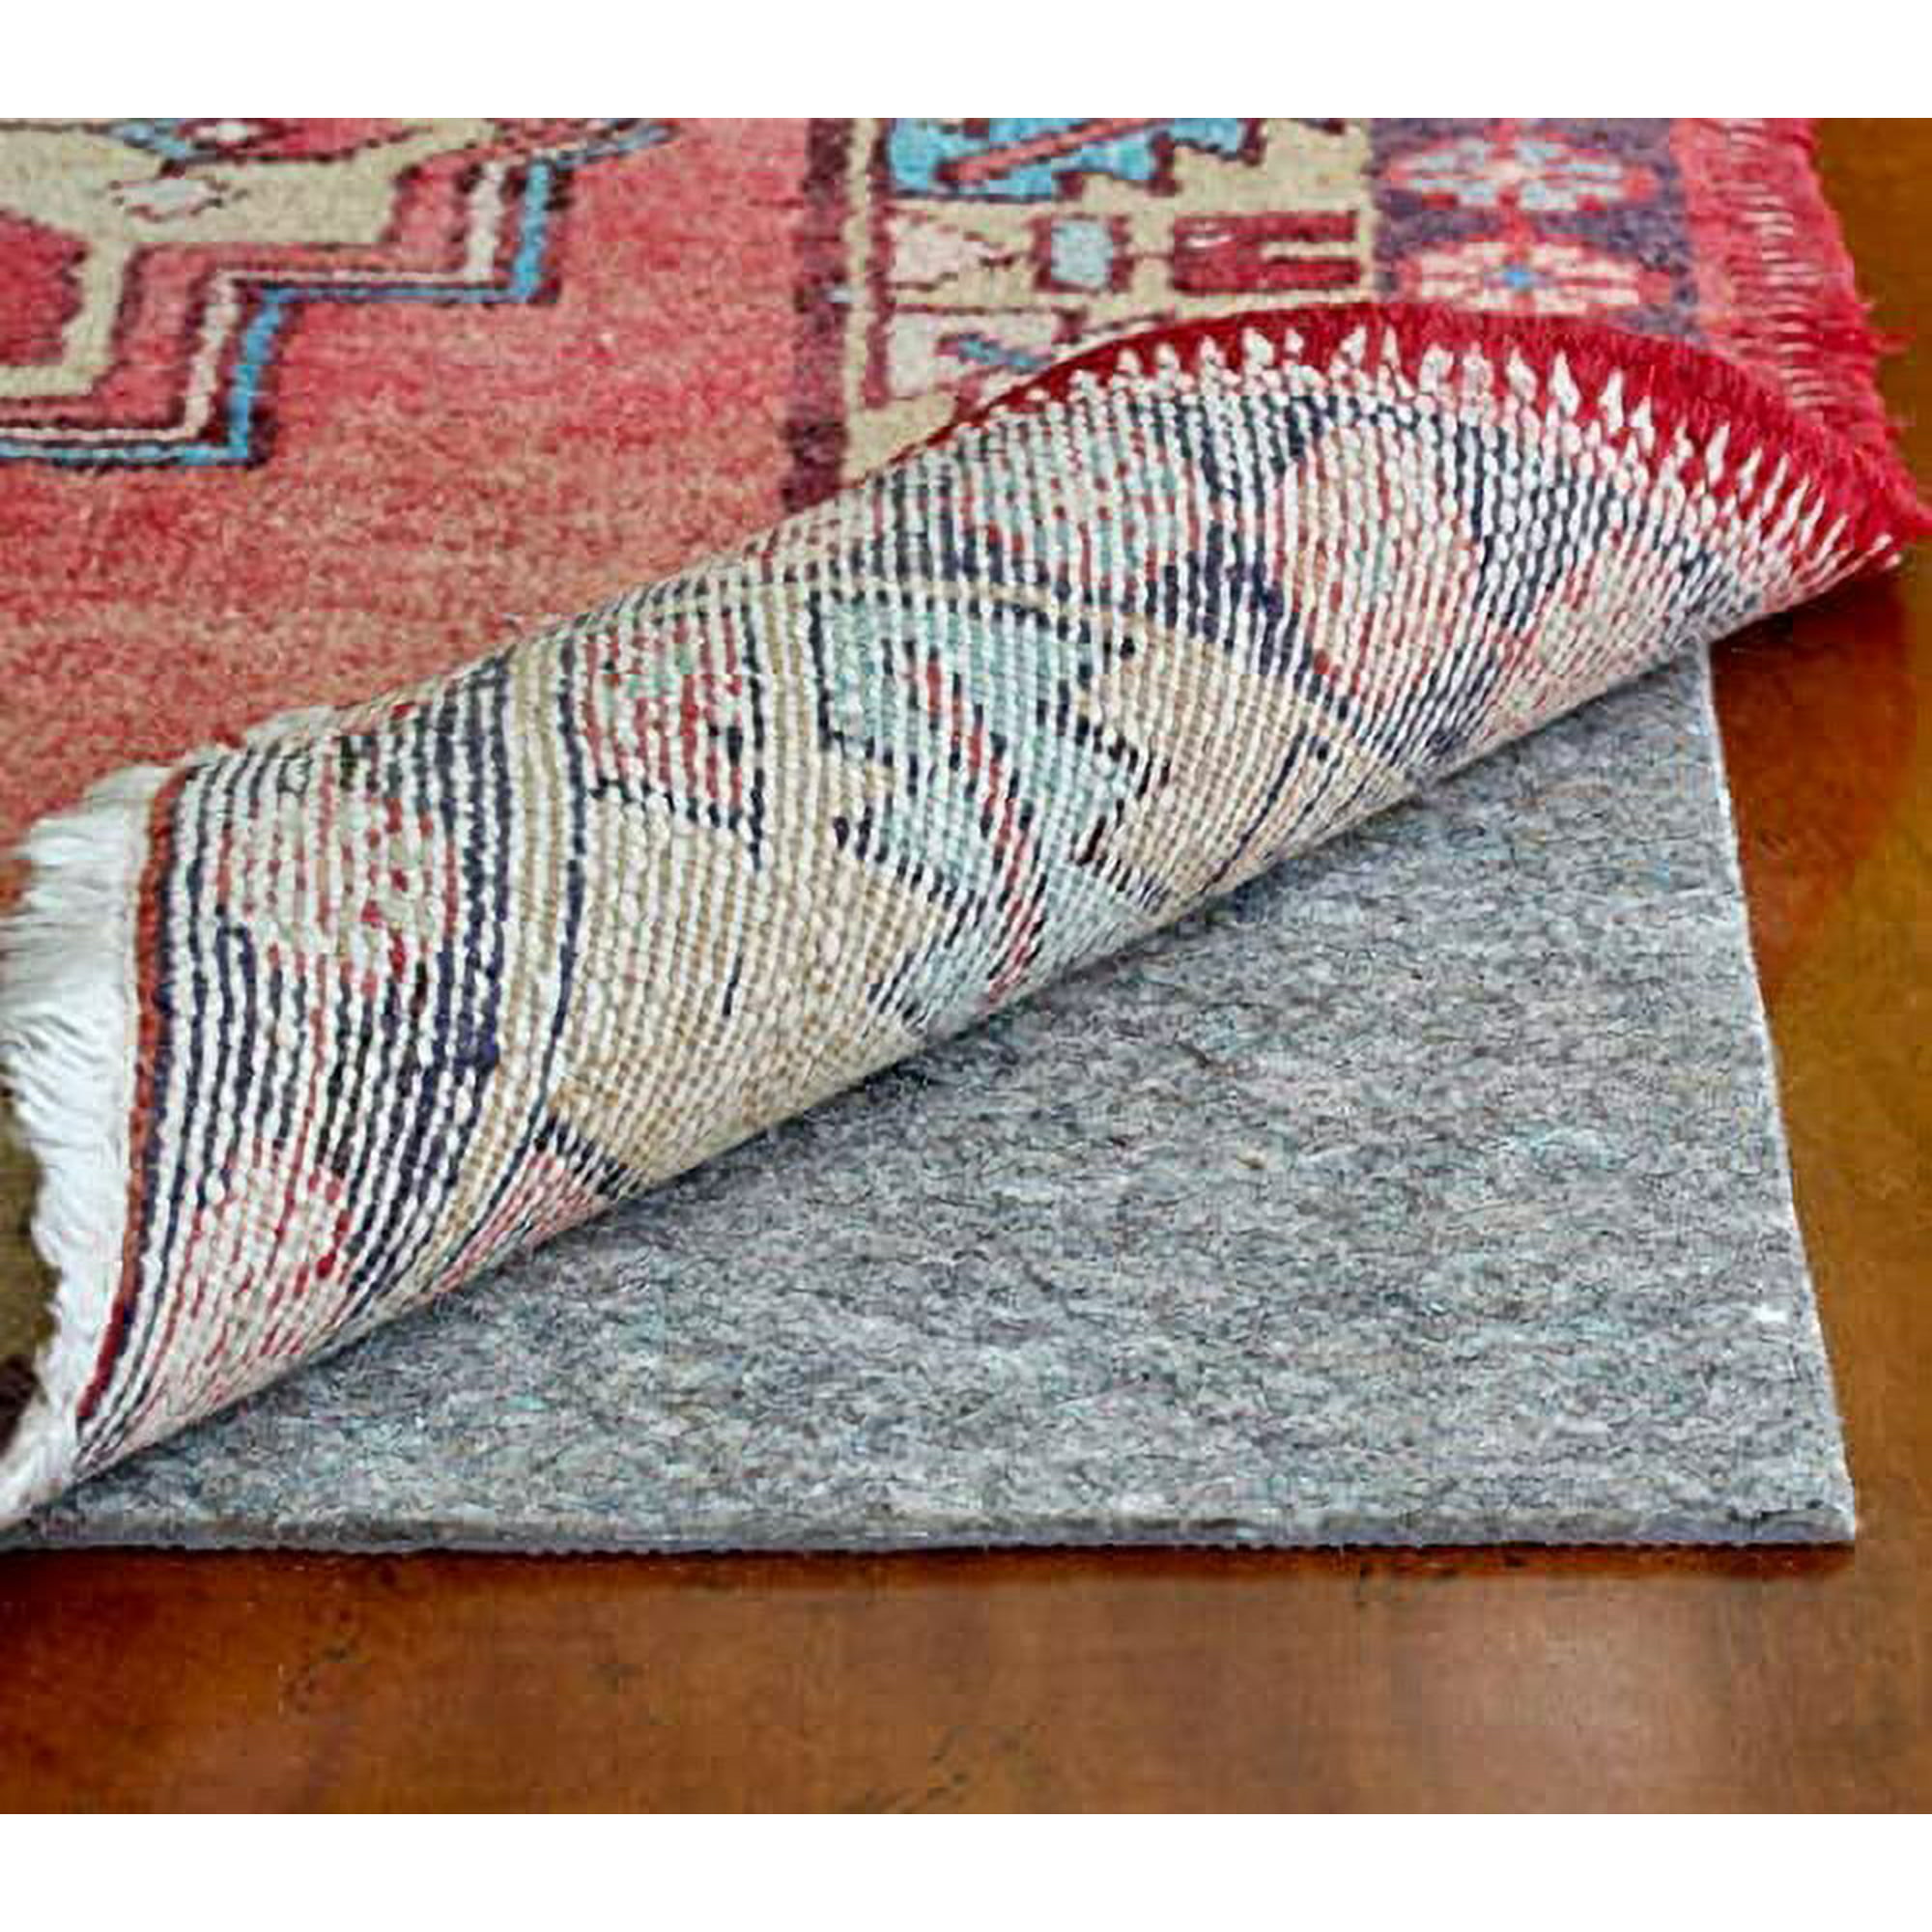 Dual Surface - 2'x5' - 1/8 Thick - Rubber - Non-Slip Backing Rug Pad -  Adds Low-Profile Comfort and Protection 